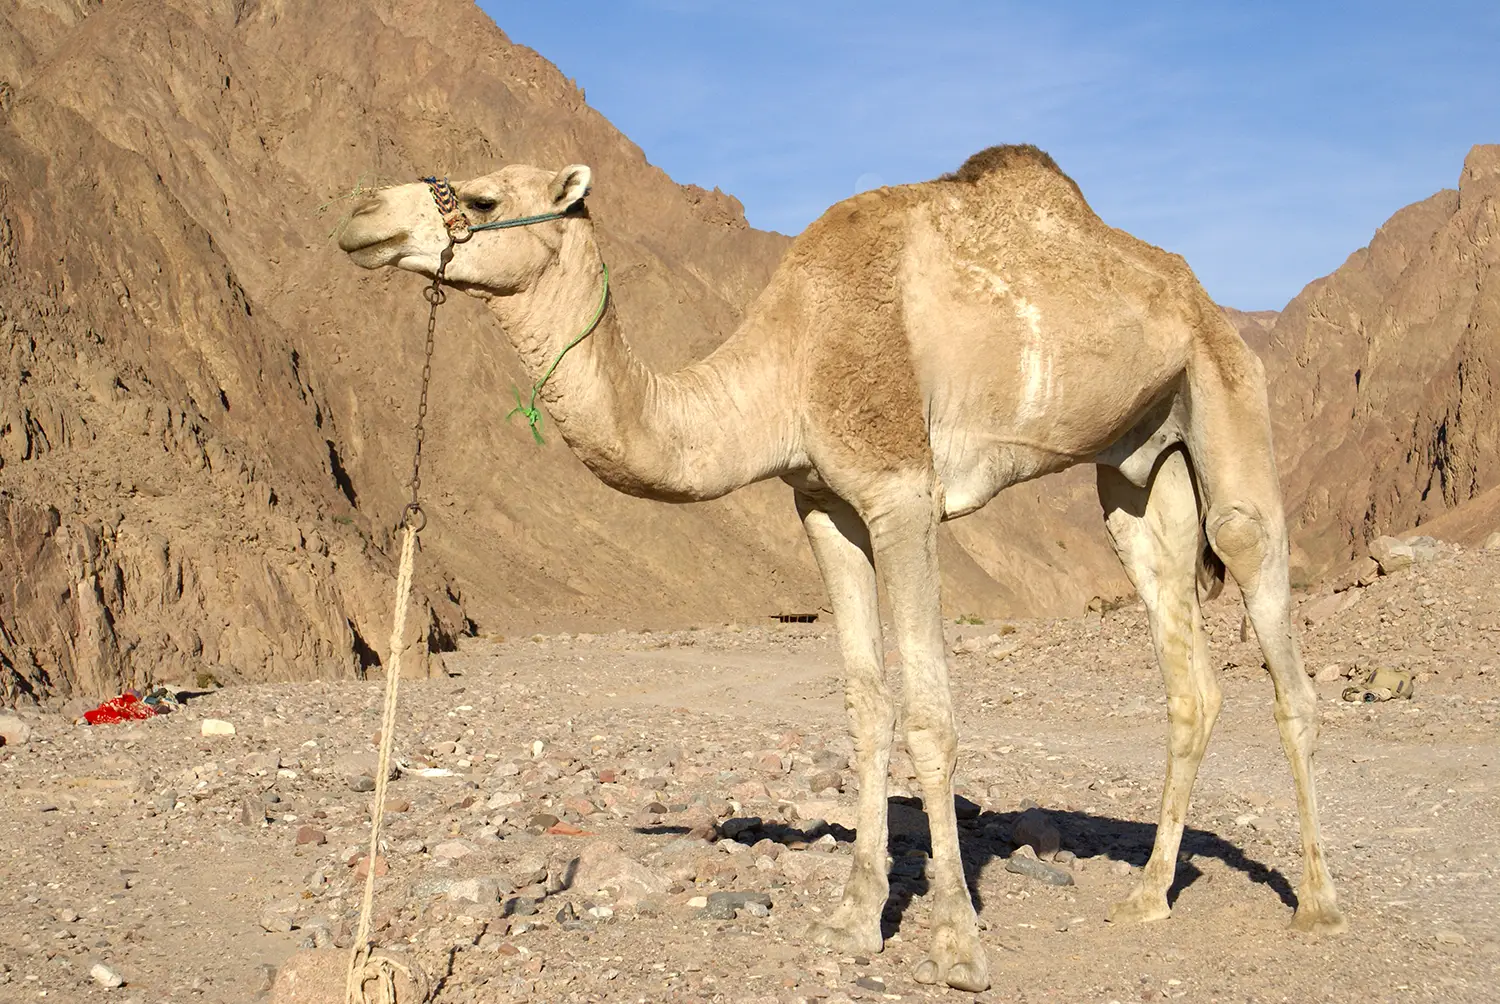 A camel with one hump.